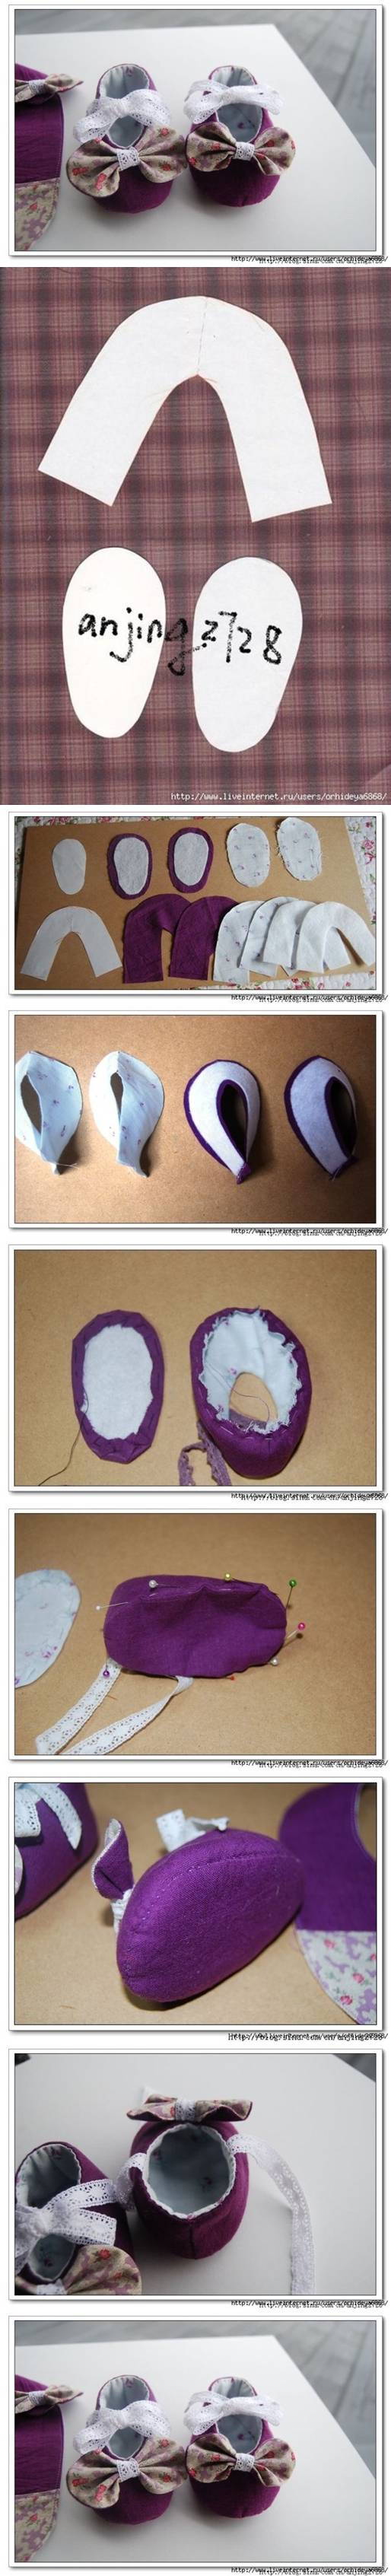 DIY Cute Baby Shoes with Bows 2